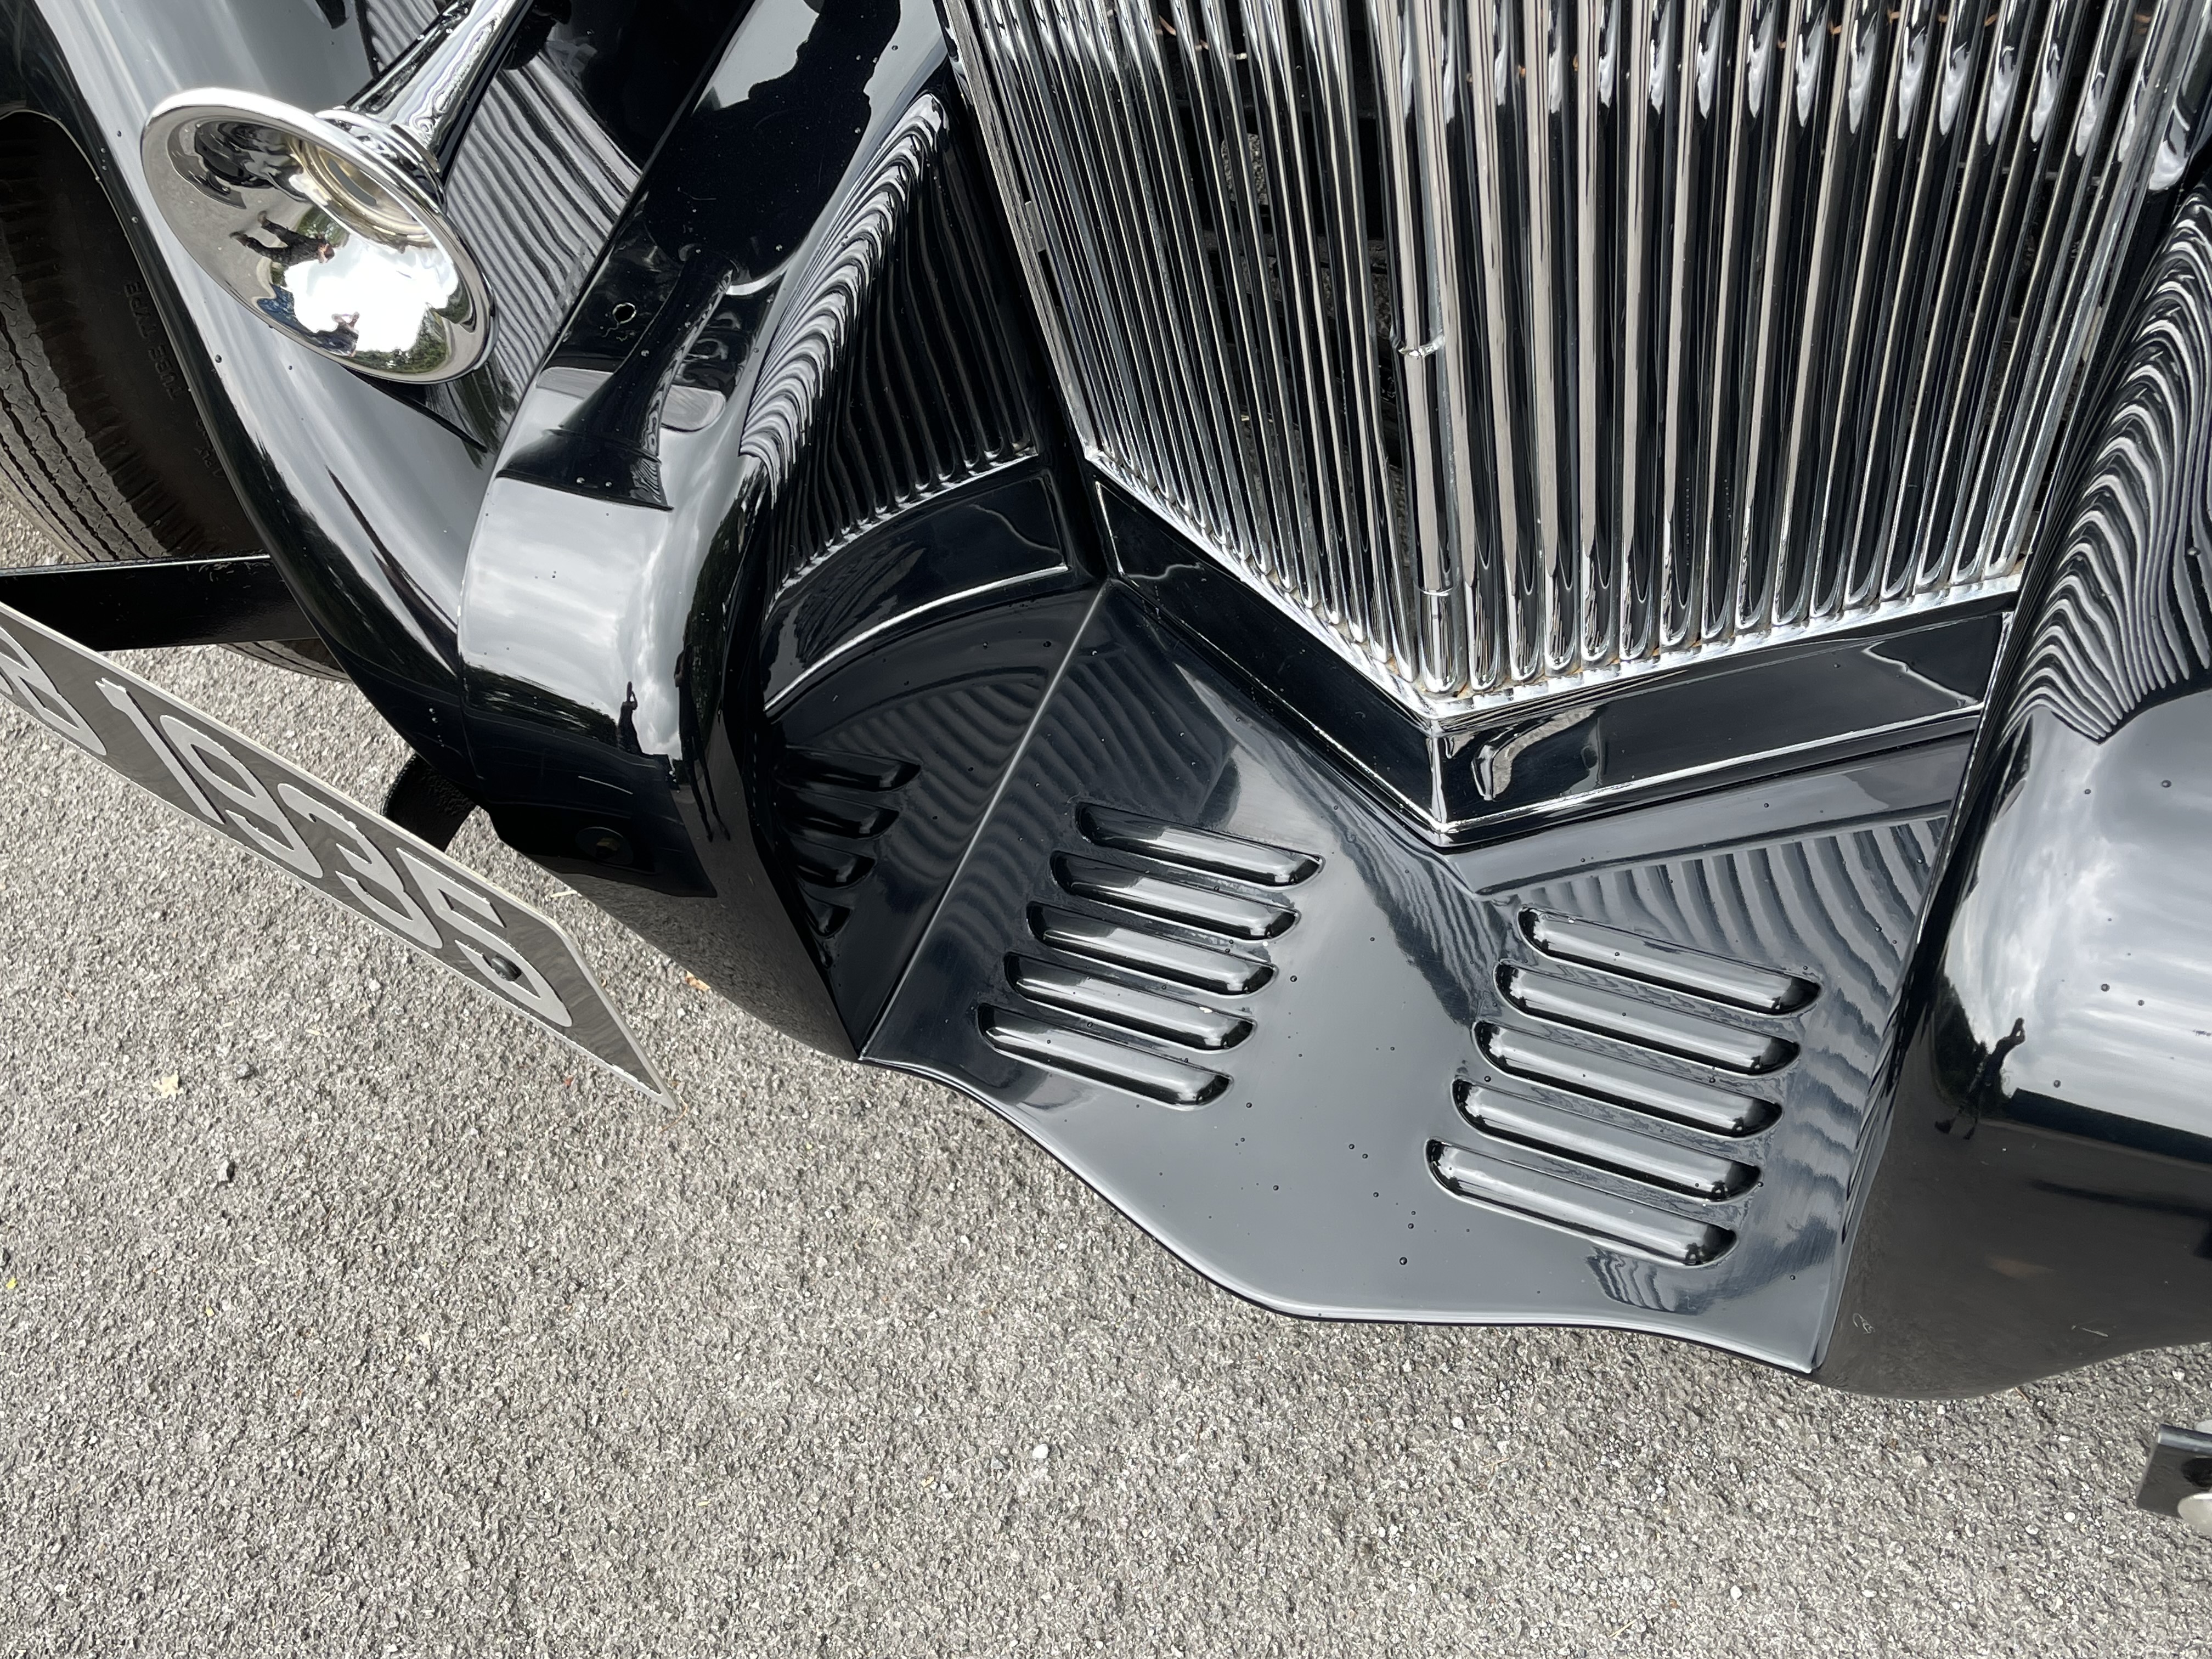 1937 Brough Superior 6-cylinder 3.5 litre Drophead Coupe – The subject of a recent full restoration - Image 14 of 21